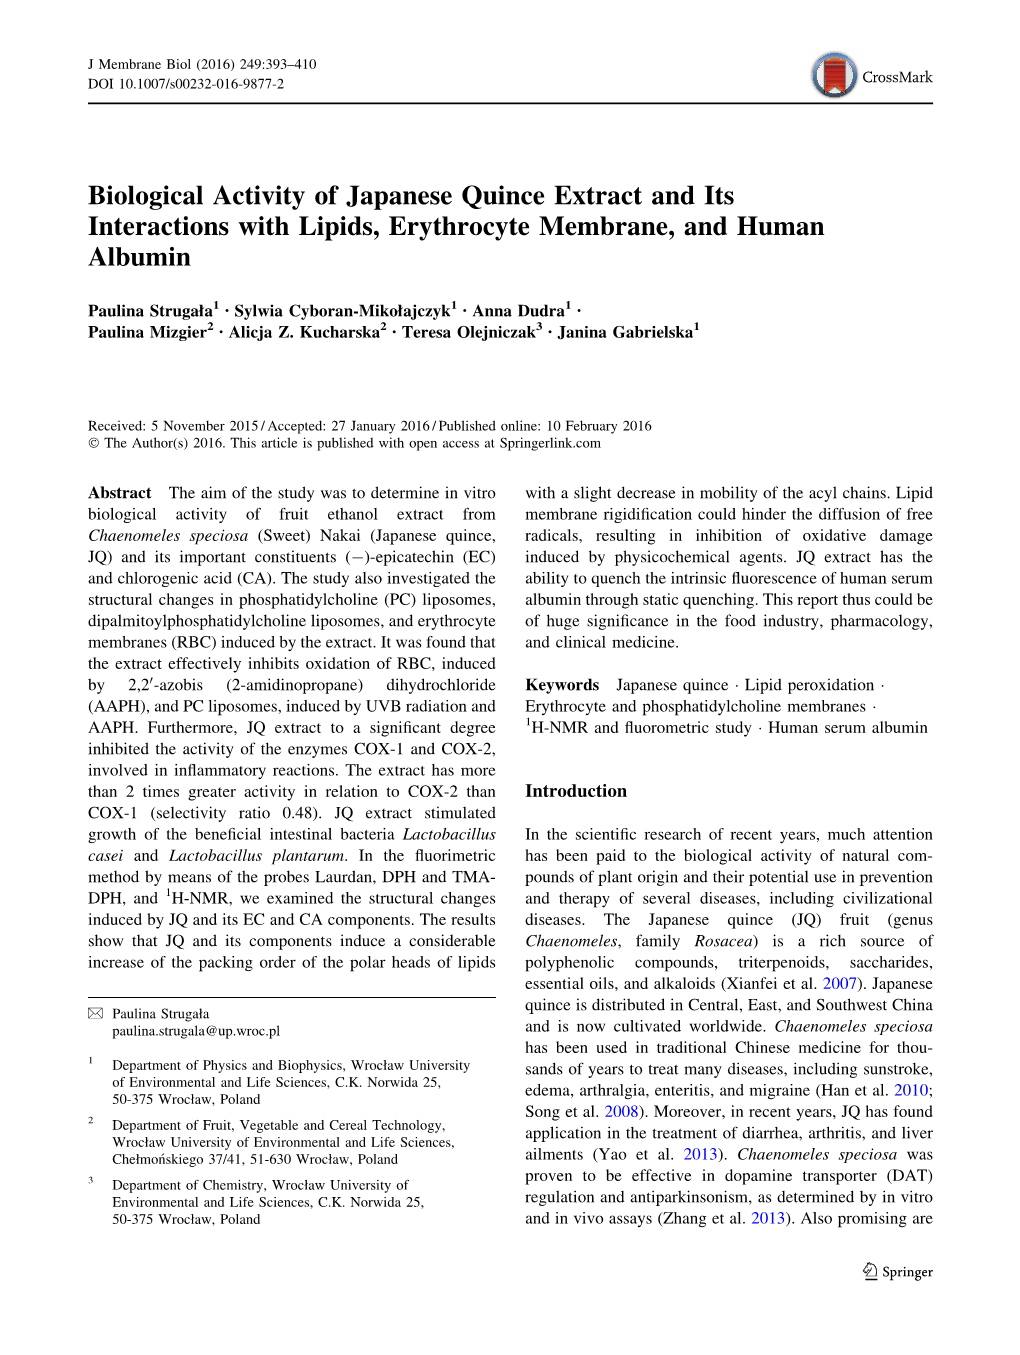 Biological Activity of Japanese Quince Extract and Its Interactions with Lipids, Erythrocyte Membrane, and Human Albumin